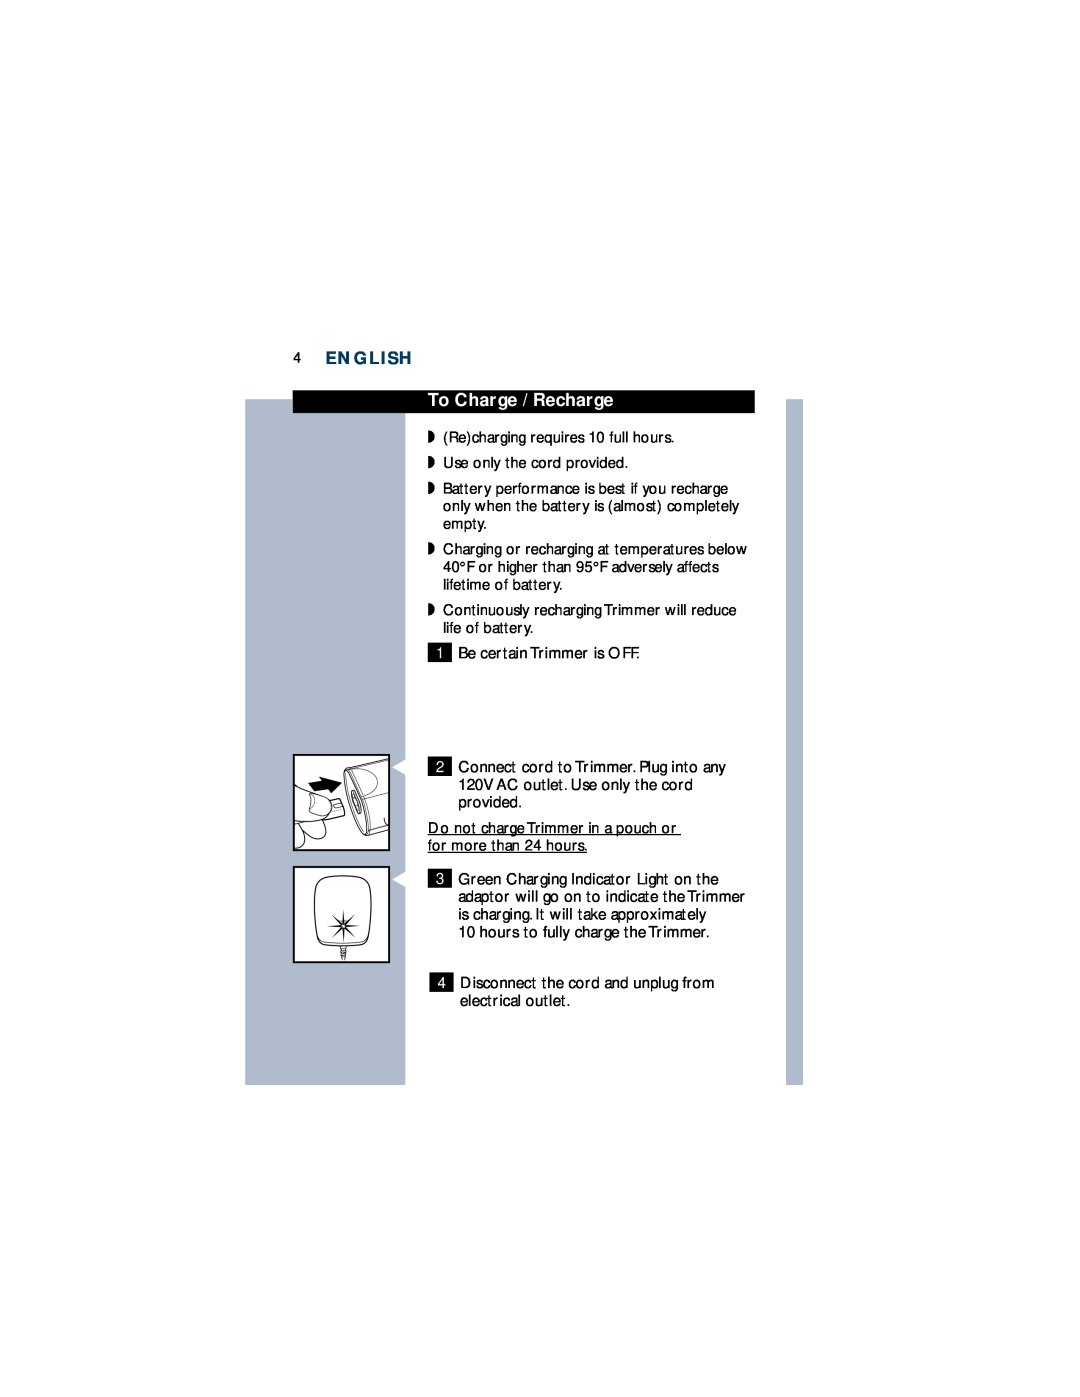 Philips T660 manual To Charge / Recharge, English 